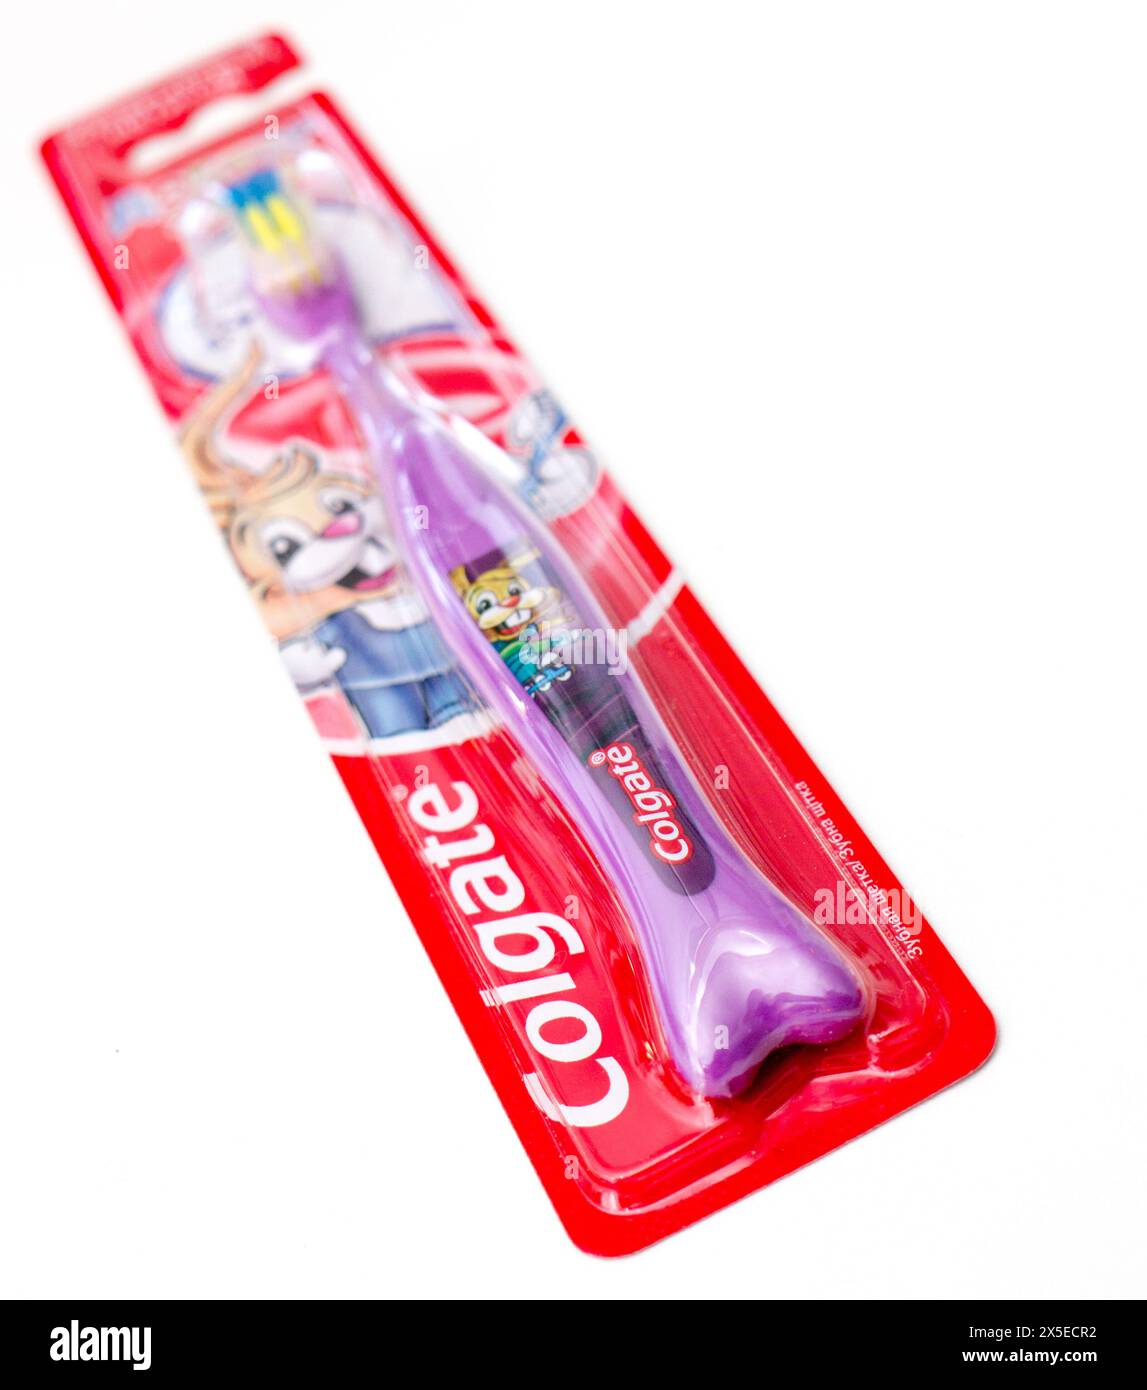 Colgate Toothbrush. Colgate-Palmolive Company is an American multinational consumer products company headquartered on Park Avenue in Midtown Manhattan Stock Photo